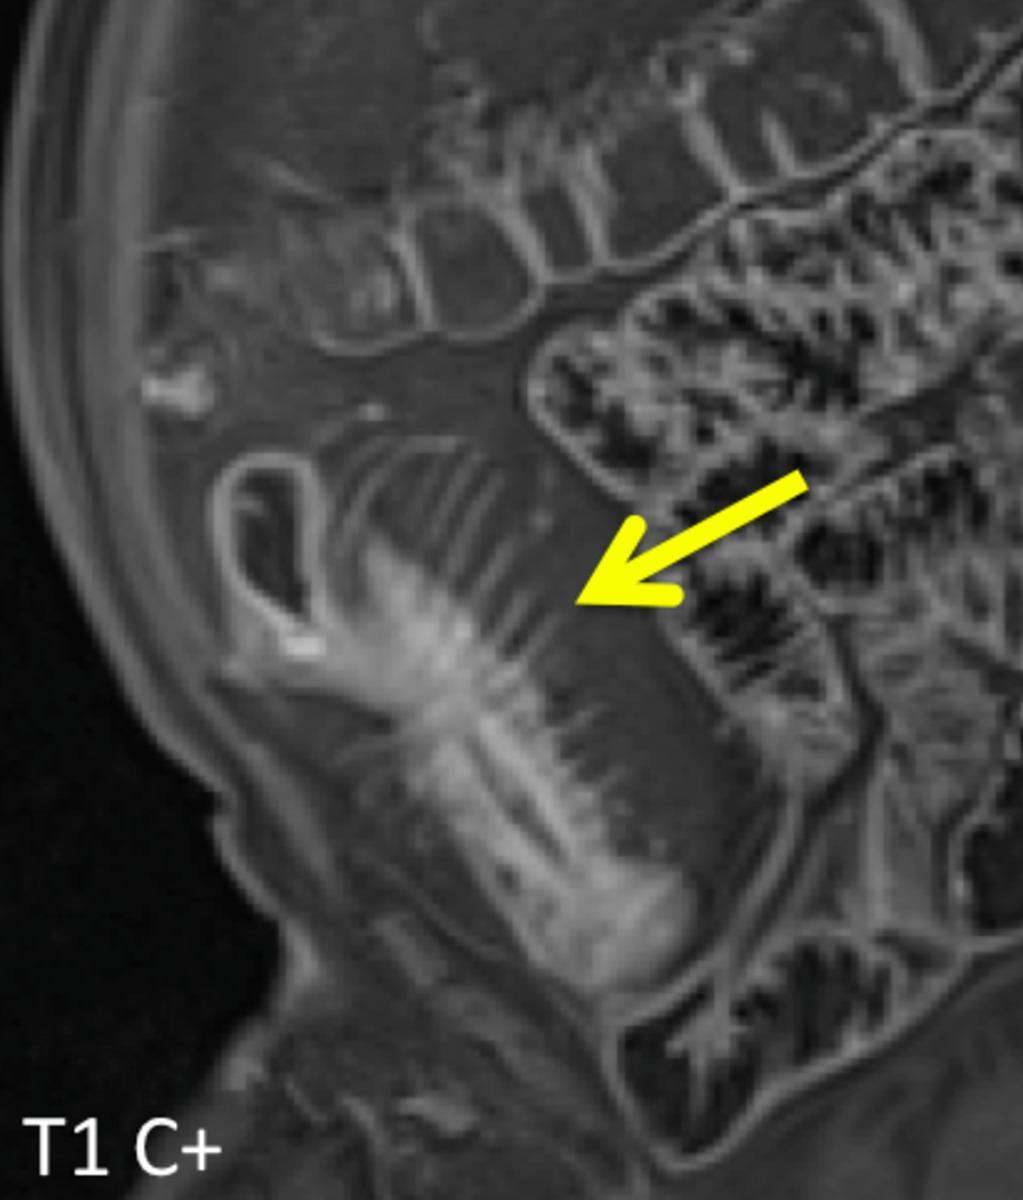 Fig. 8: "Comb sign" of the engorged vasa recta